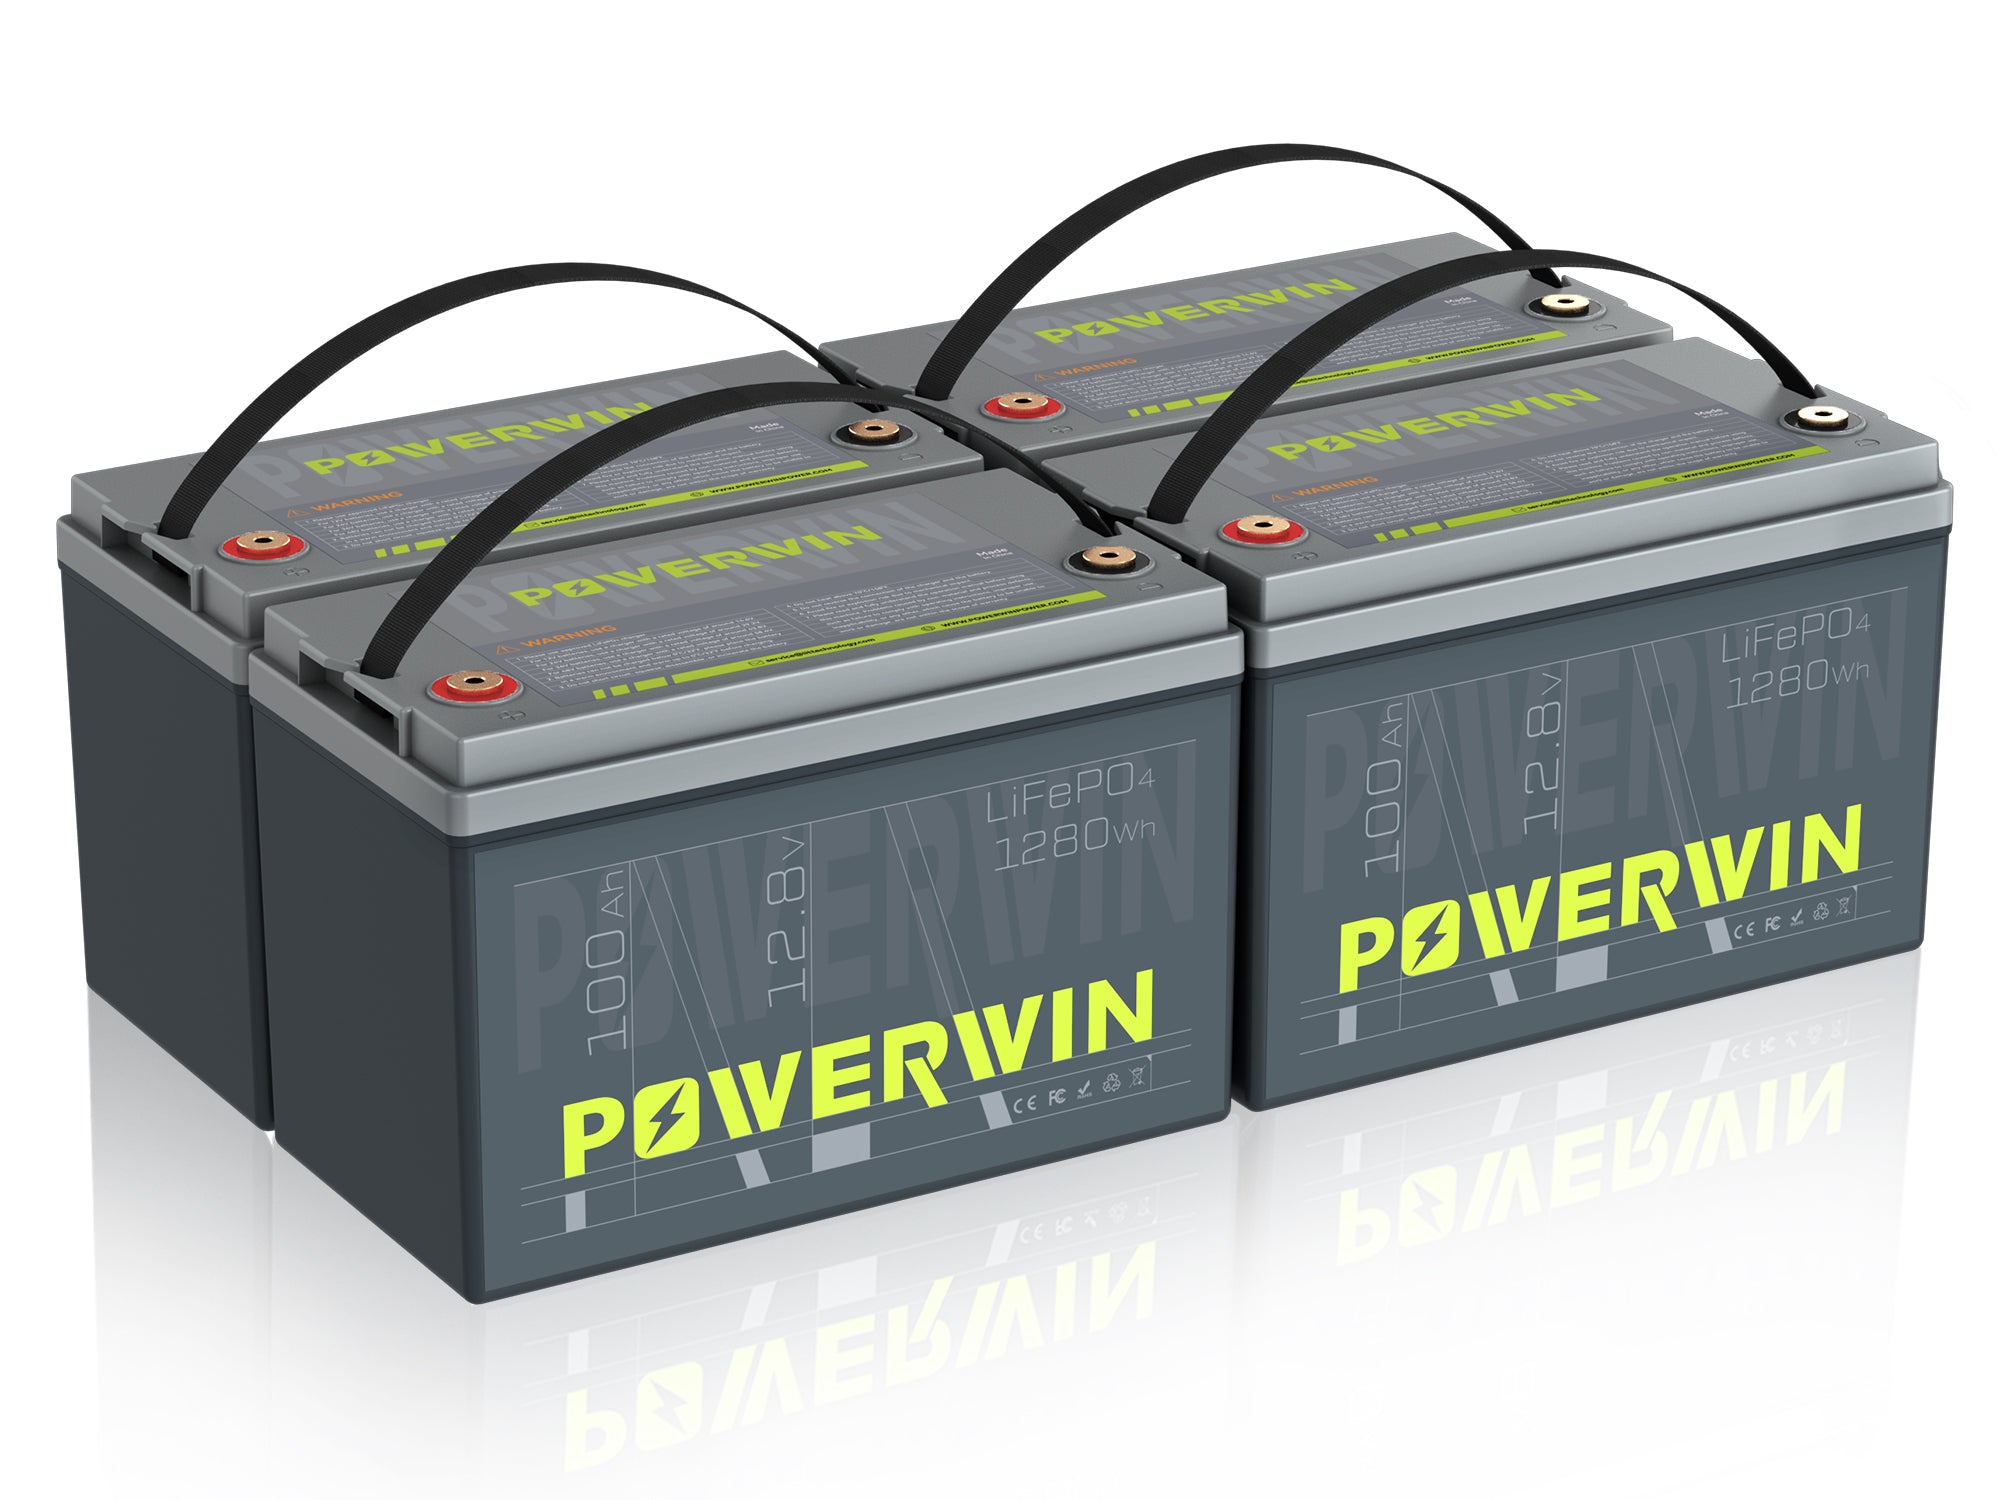 POWERWIN BT100 12V 100Ah 1280Wh LiFePO4 Lithium Battery